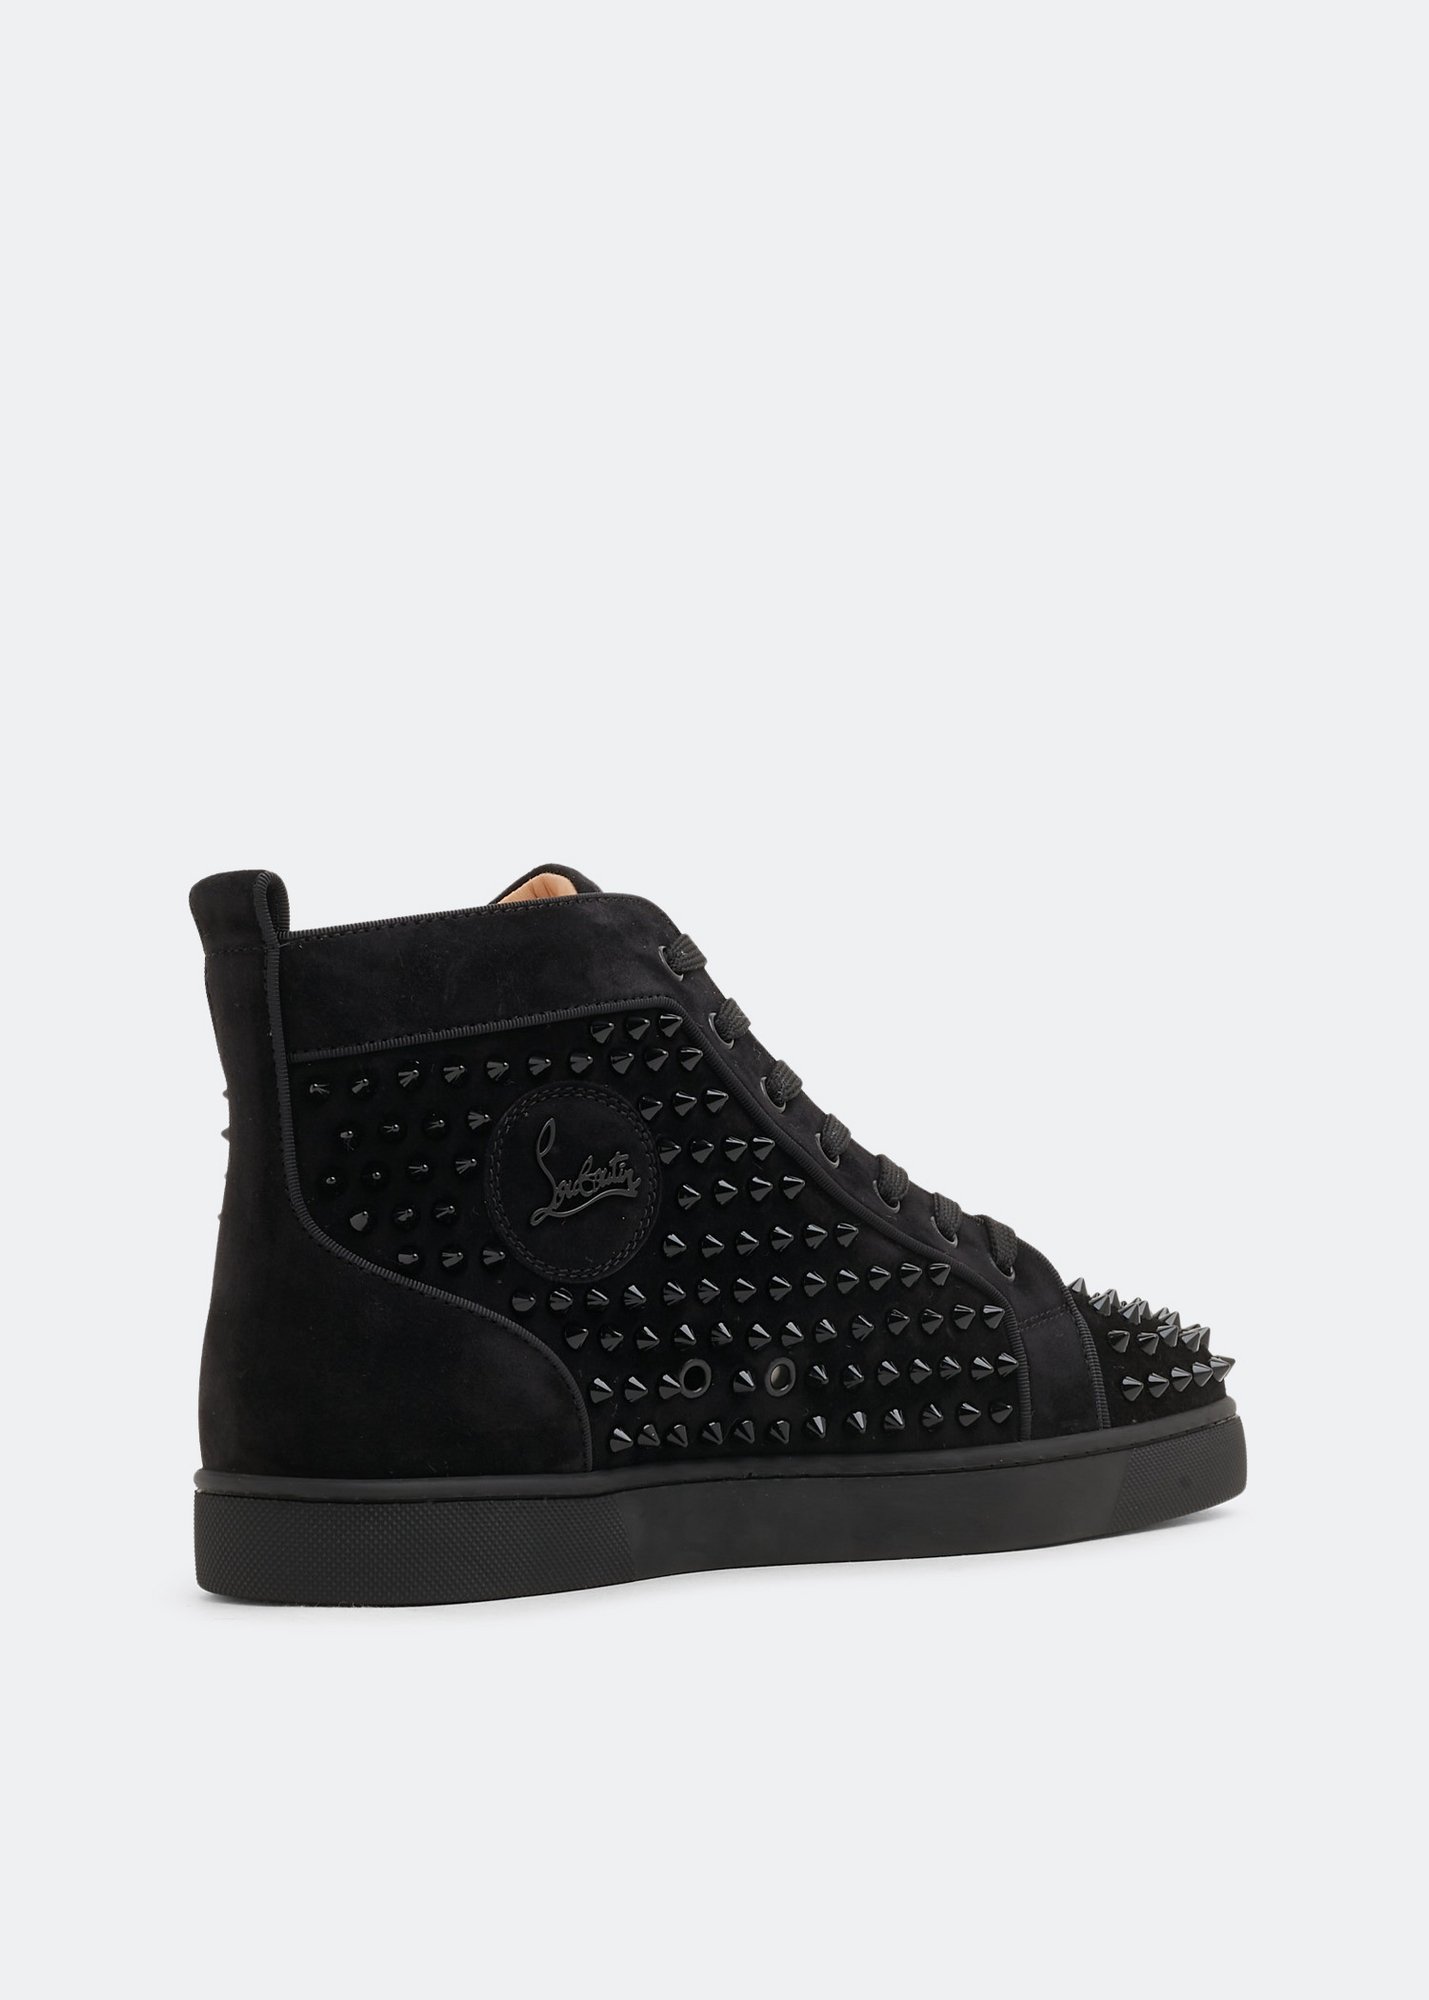 Christian Louis sneakers for Men - Black in UAE Level Shoes